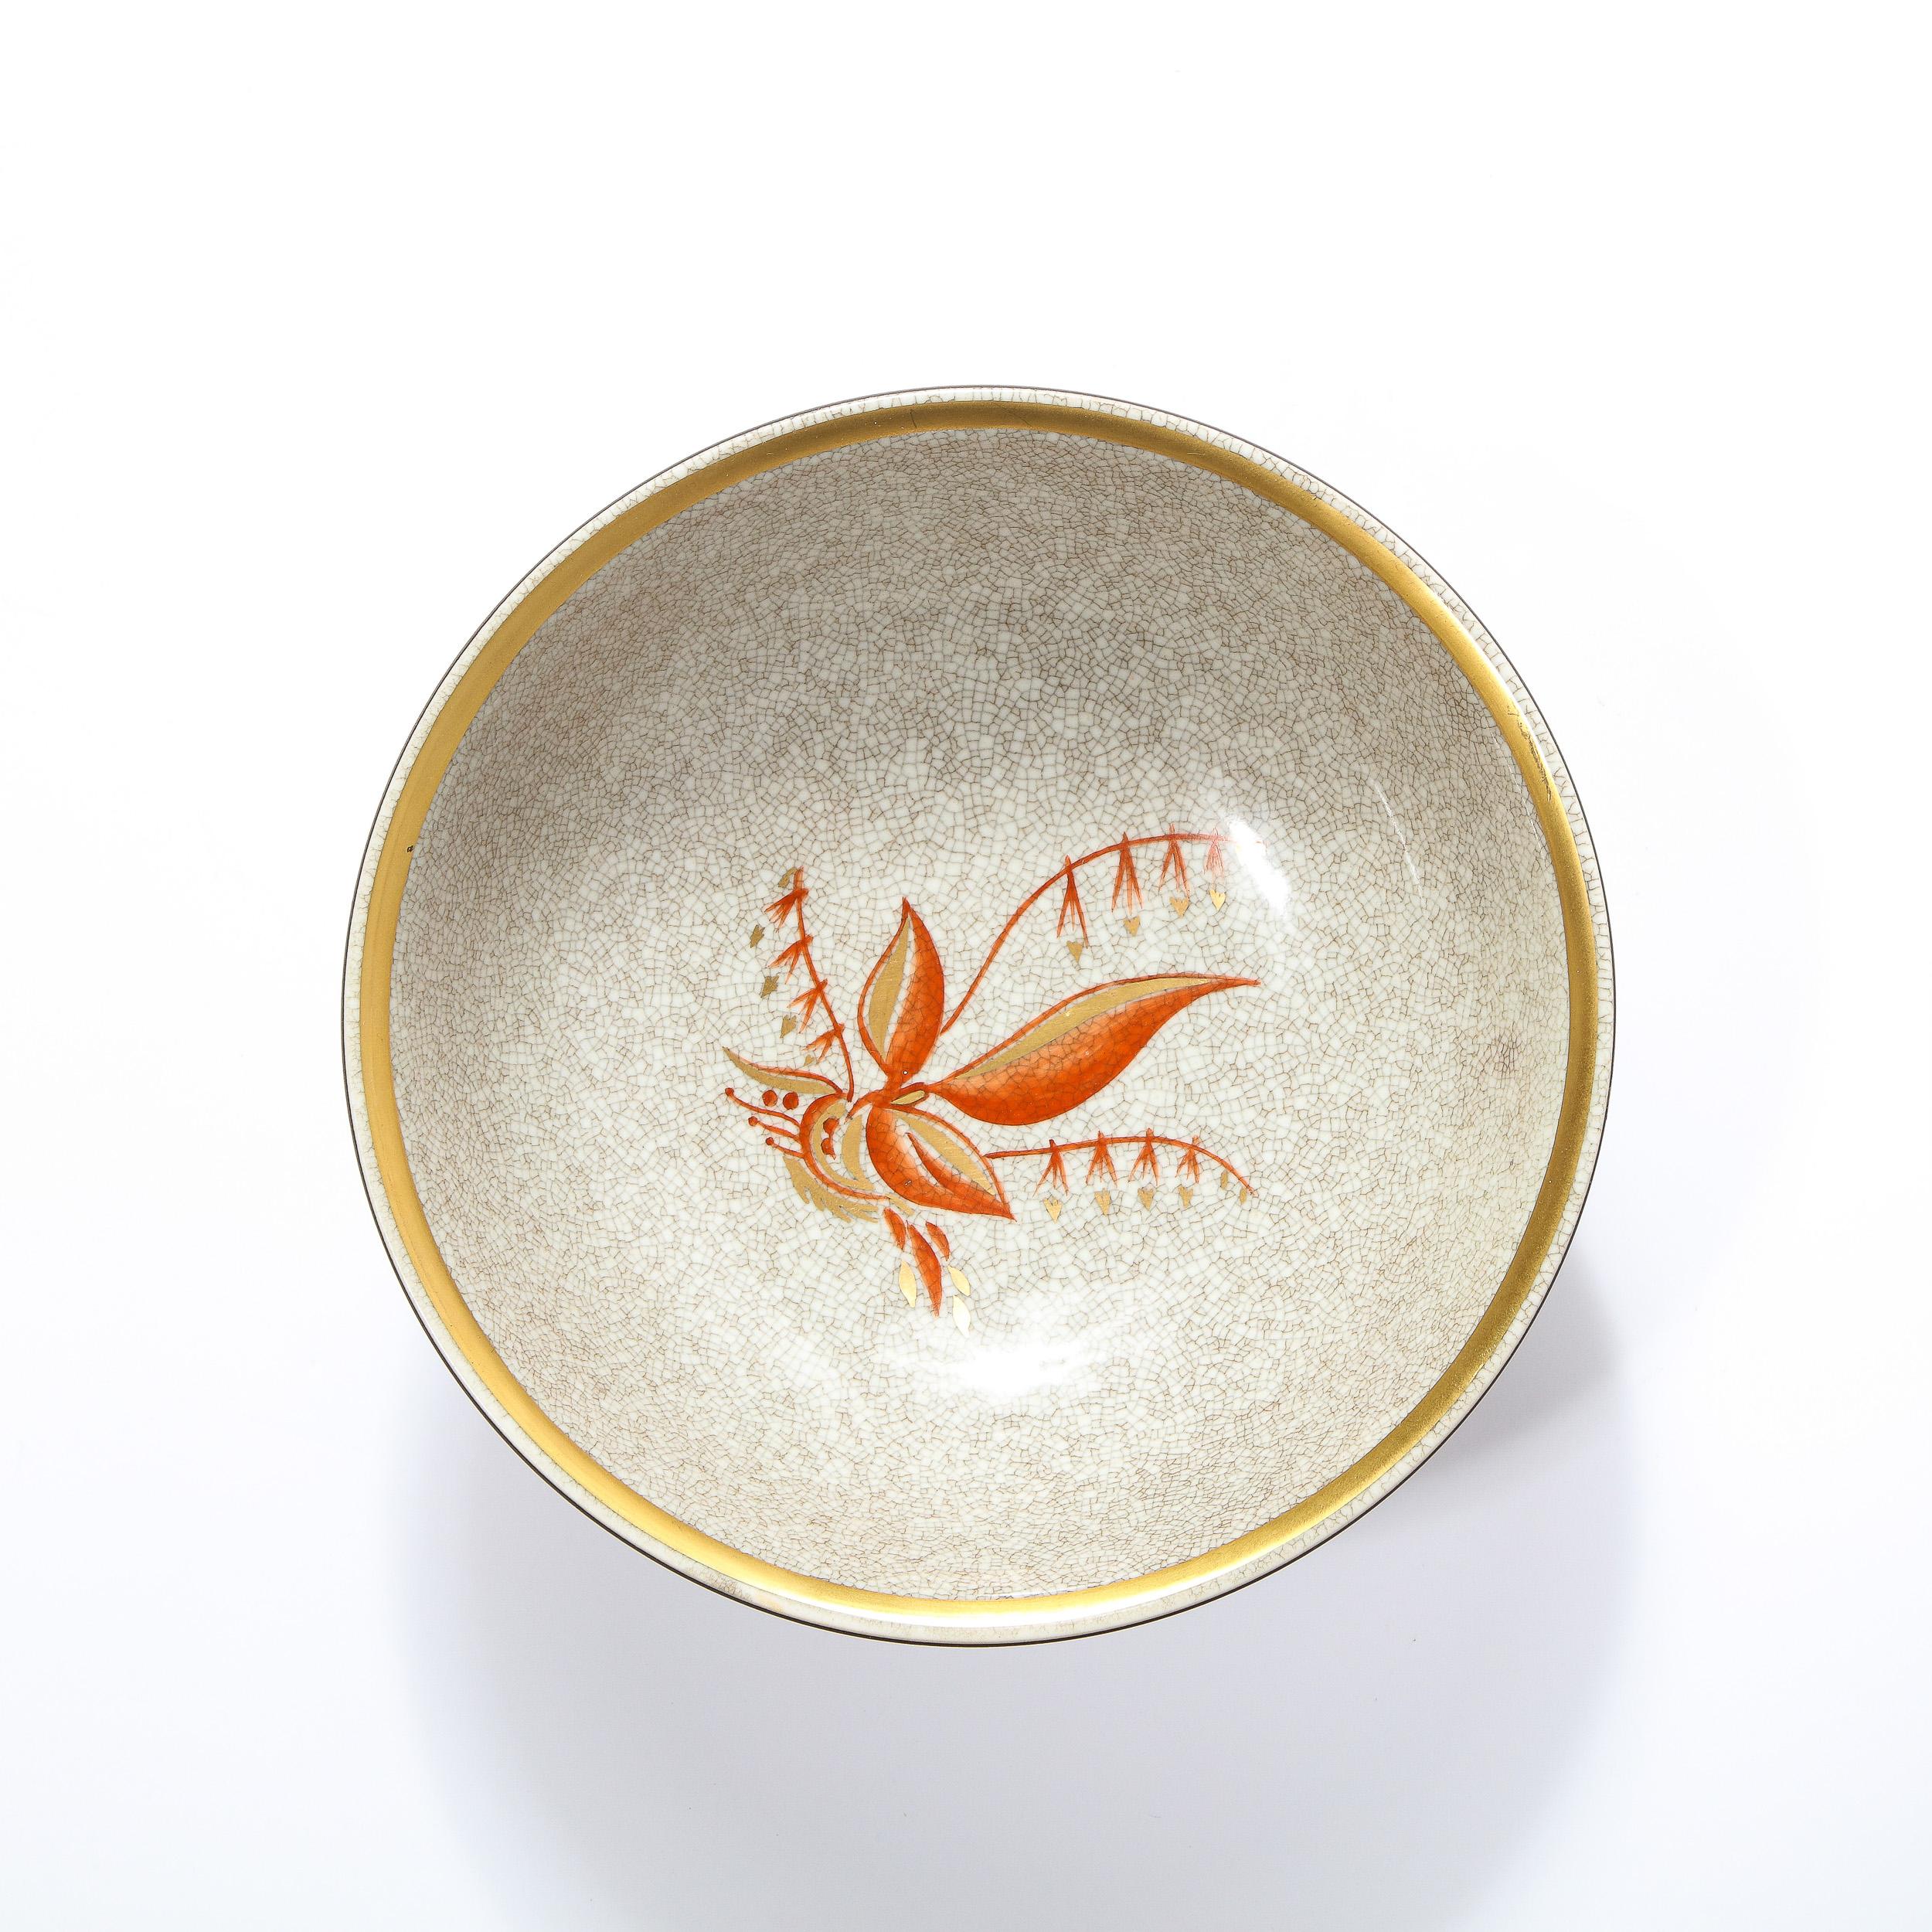 This elegant Mid-Century Modern decorative bowl/ dish was realized by the illustrious maker Royal Copenhagen in Denmark circa 1960. It features a concanve form with a cracqueleur pattern imprinted on the skein of its ceramic body. The top of the